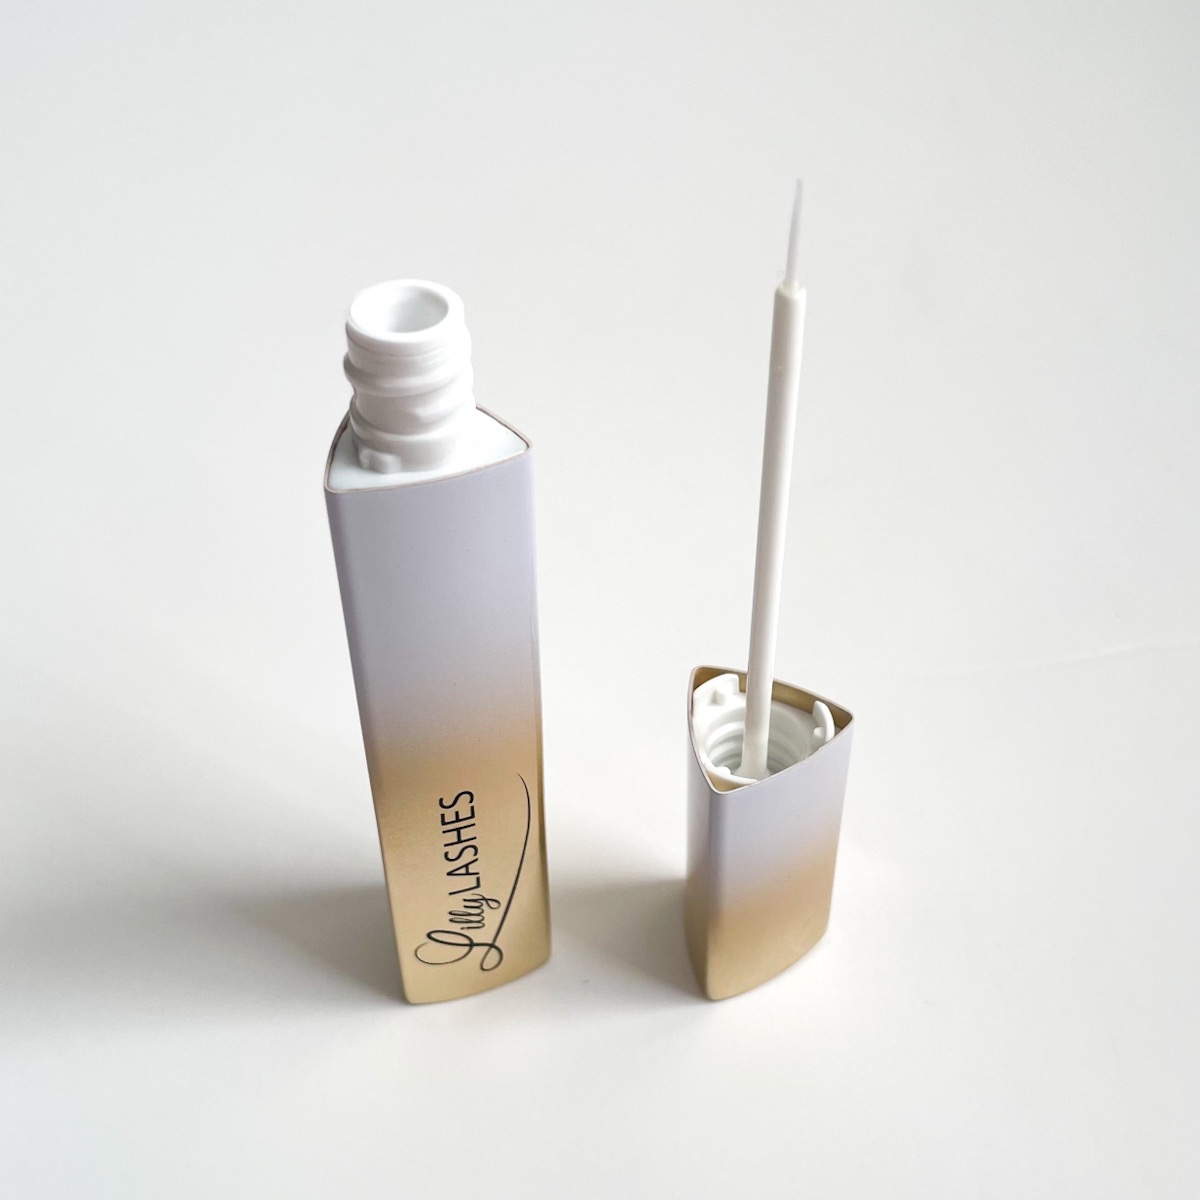 ombre gold and white lash serum, opened